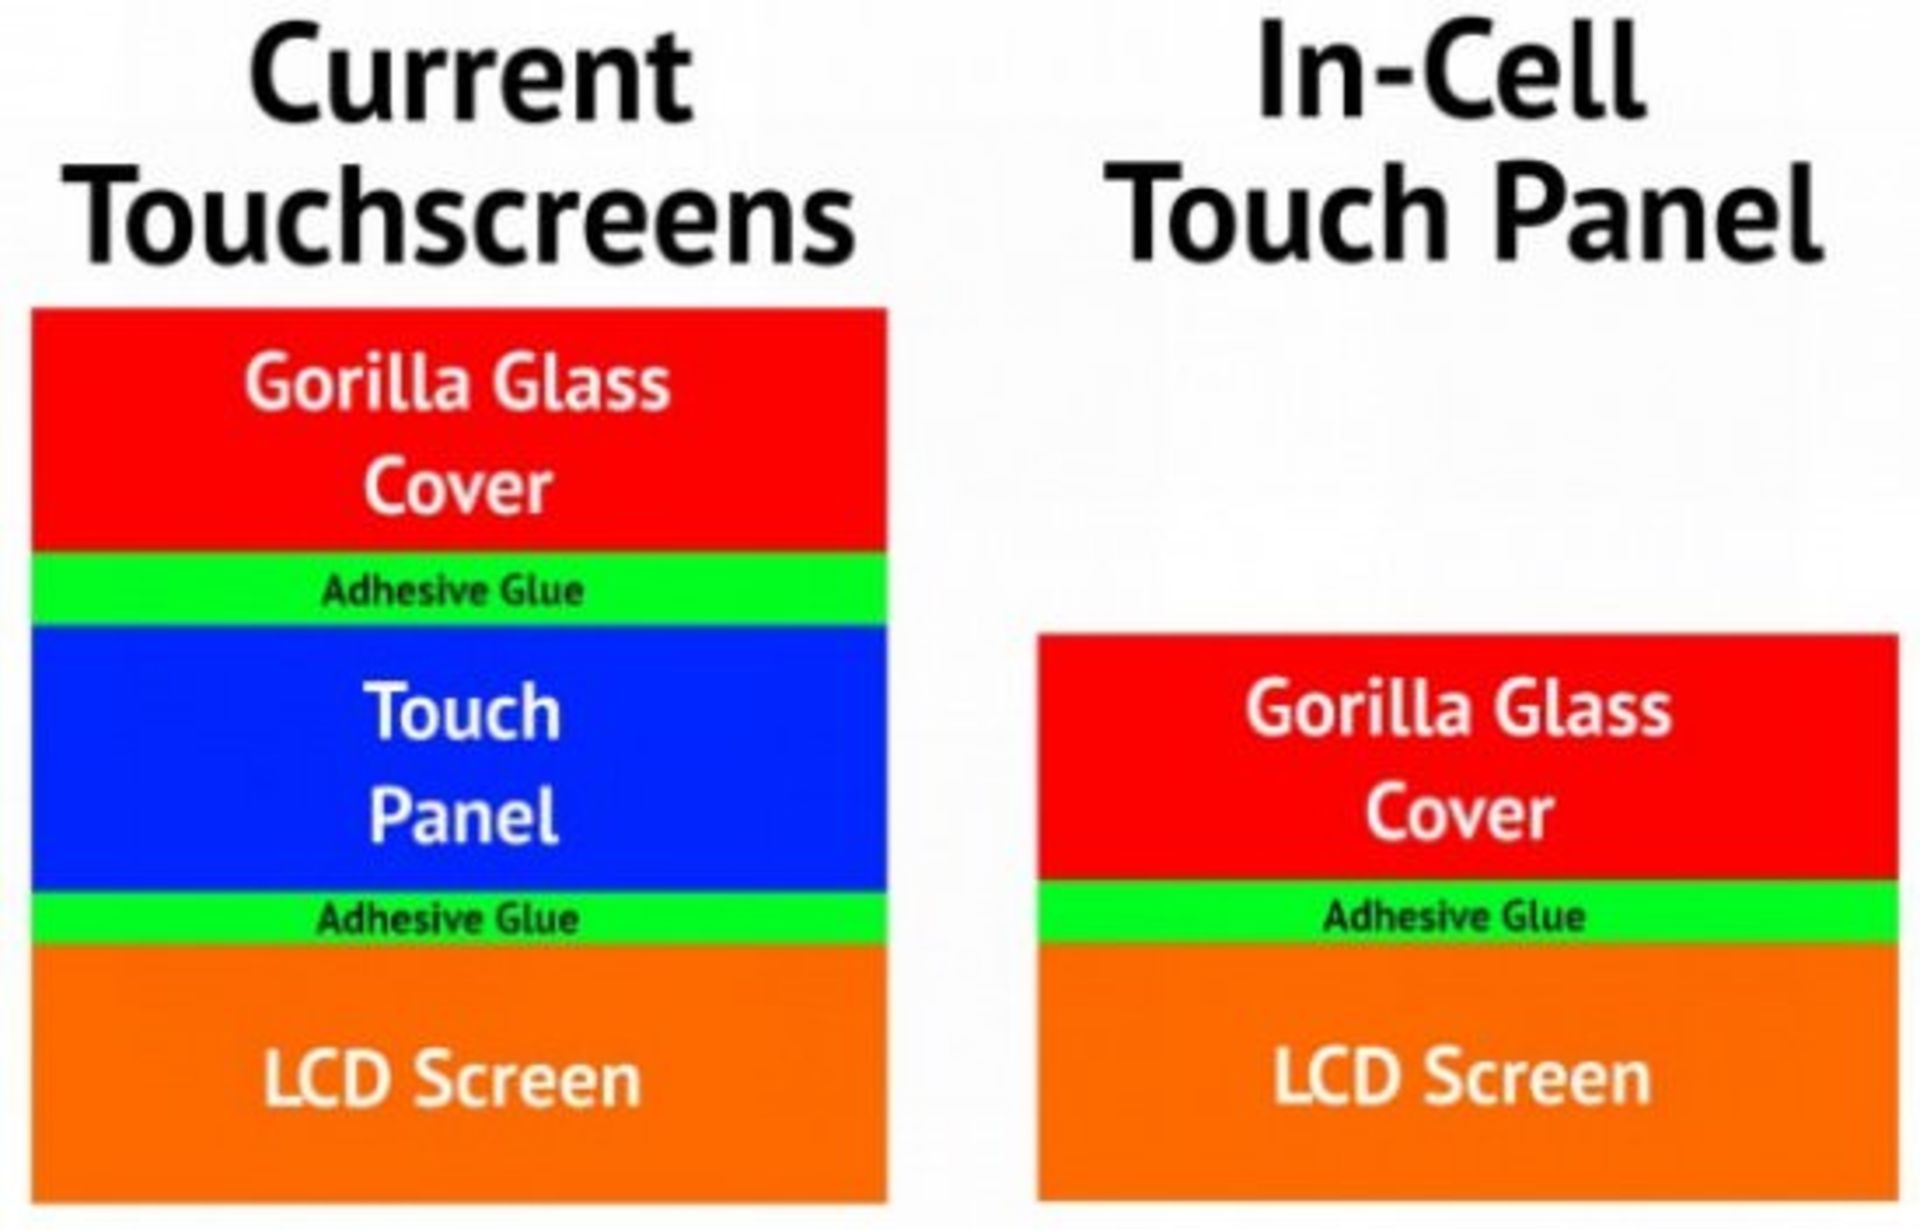 In-Cell-Touch-Panel-how-it-works-what-it-is-diagram-550x352